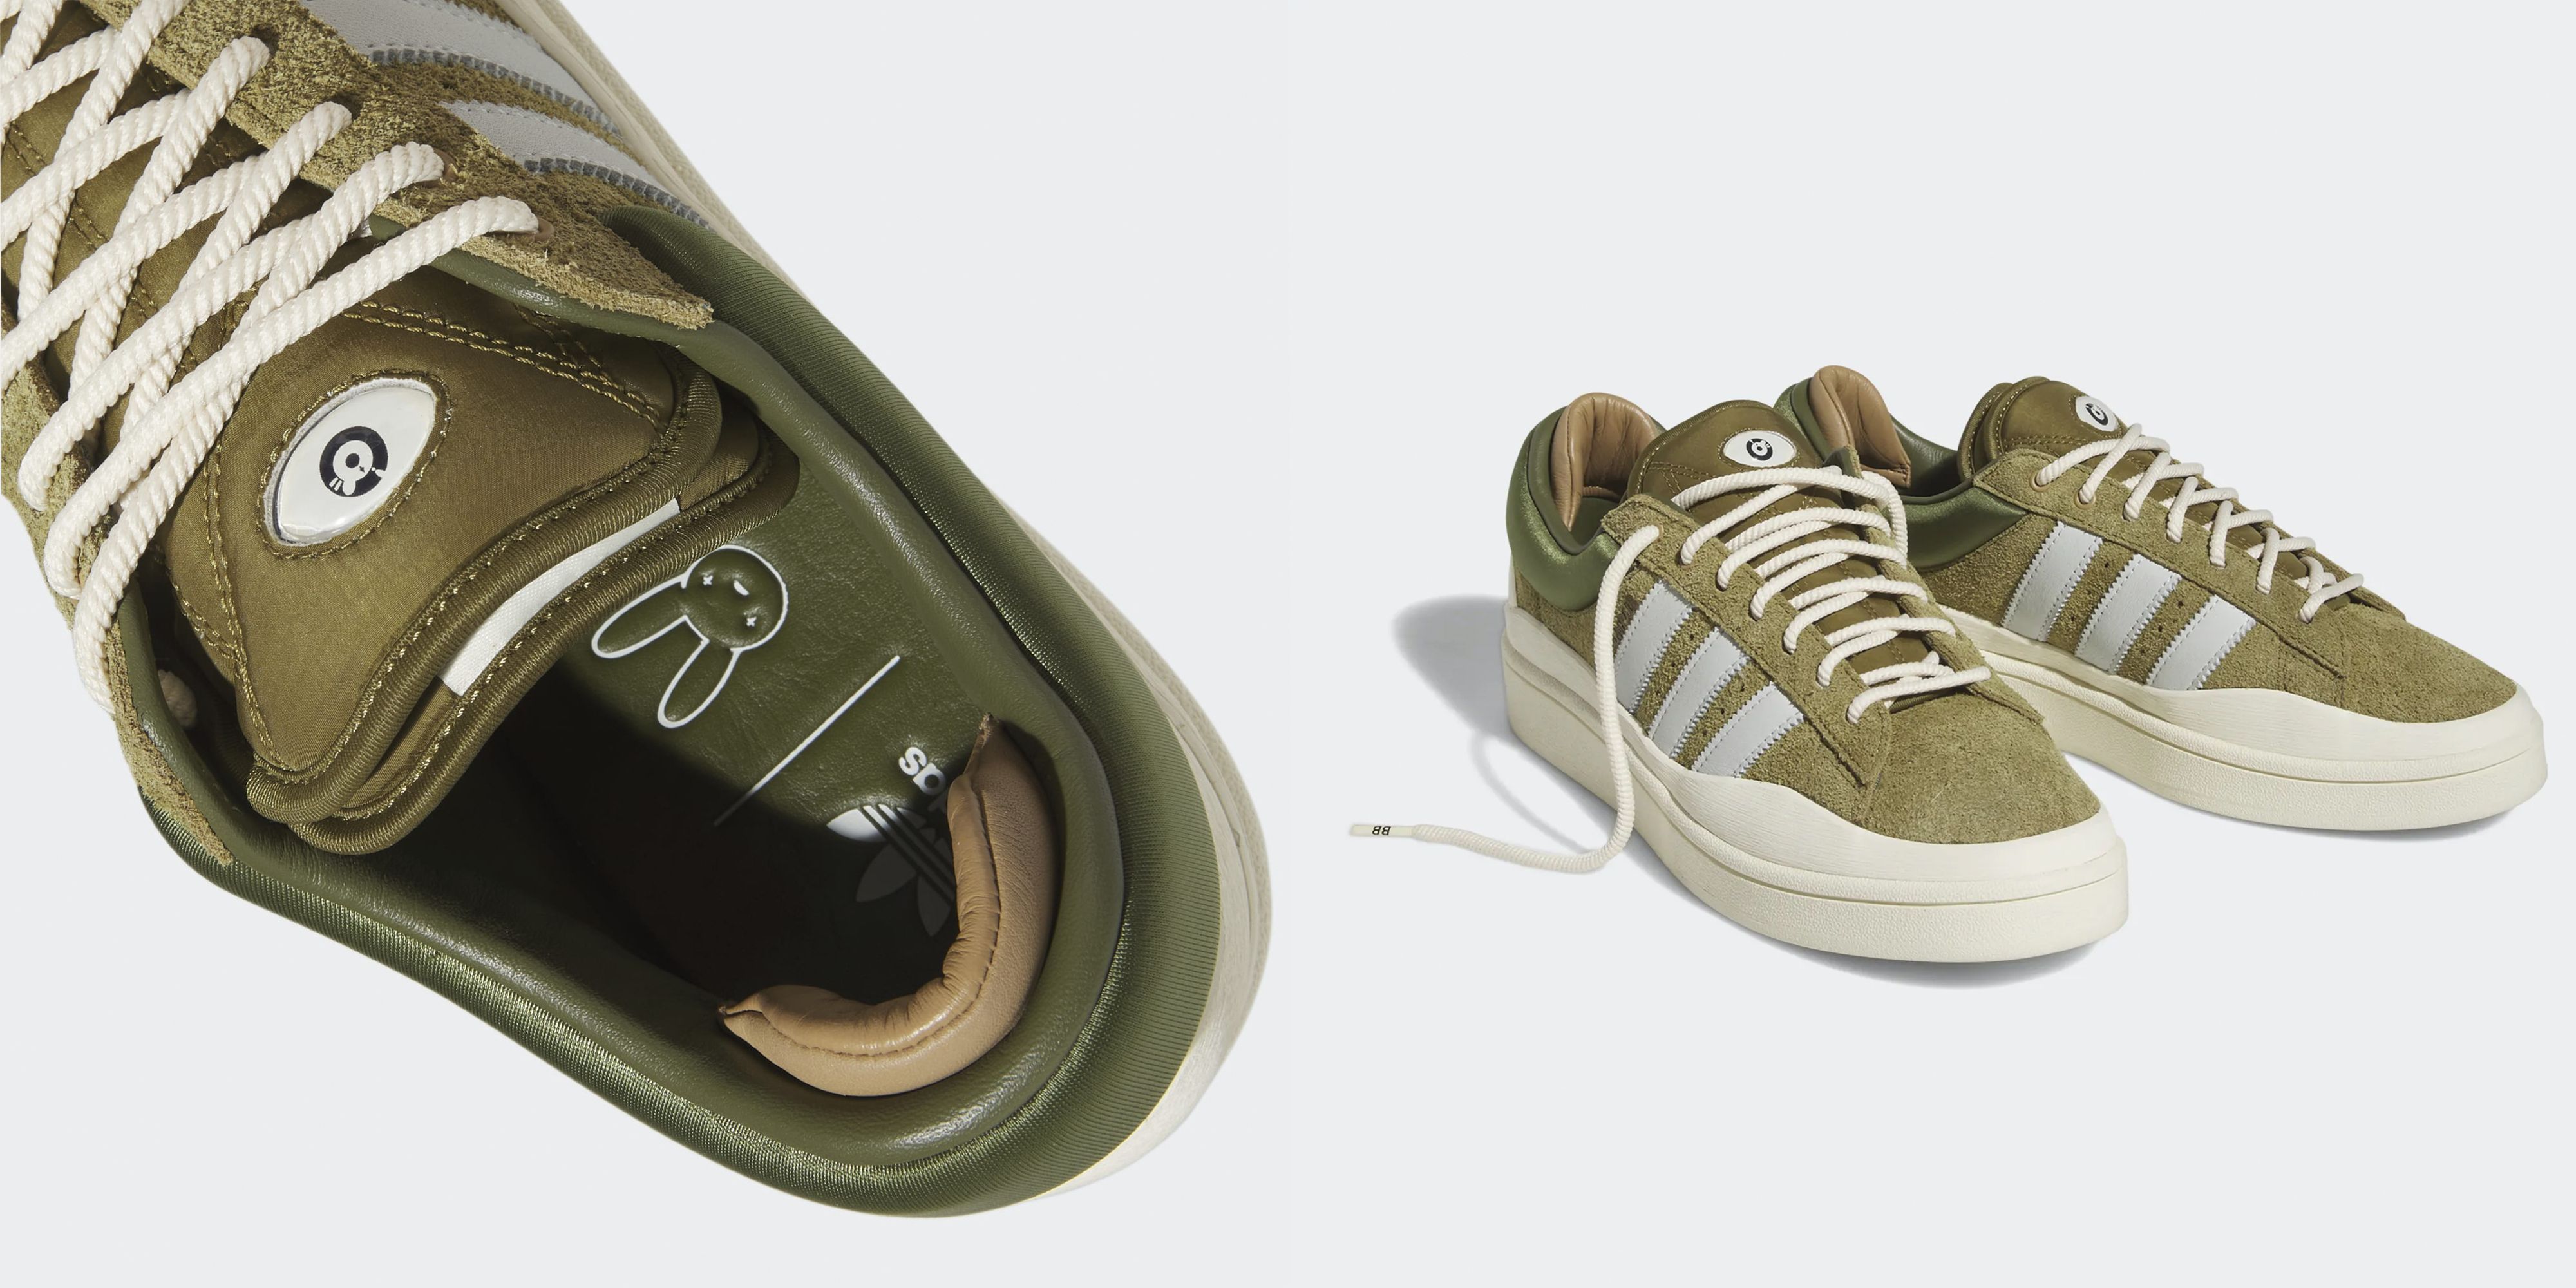 The Bad Bunny x Adidas Campus 'Wild Moss' Drops Friday. Everything to Know